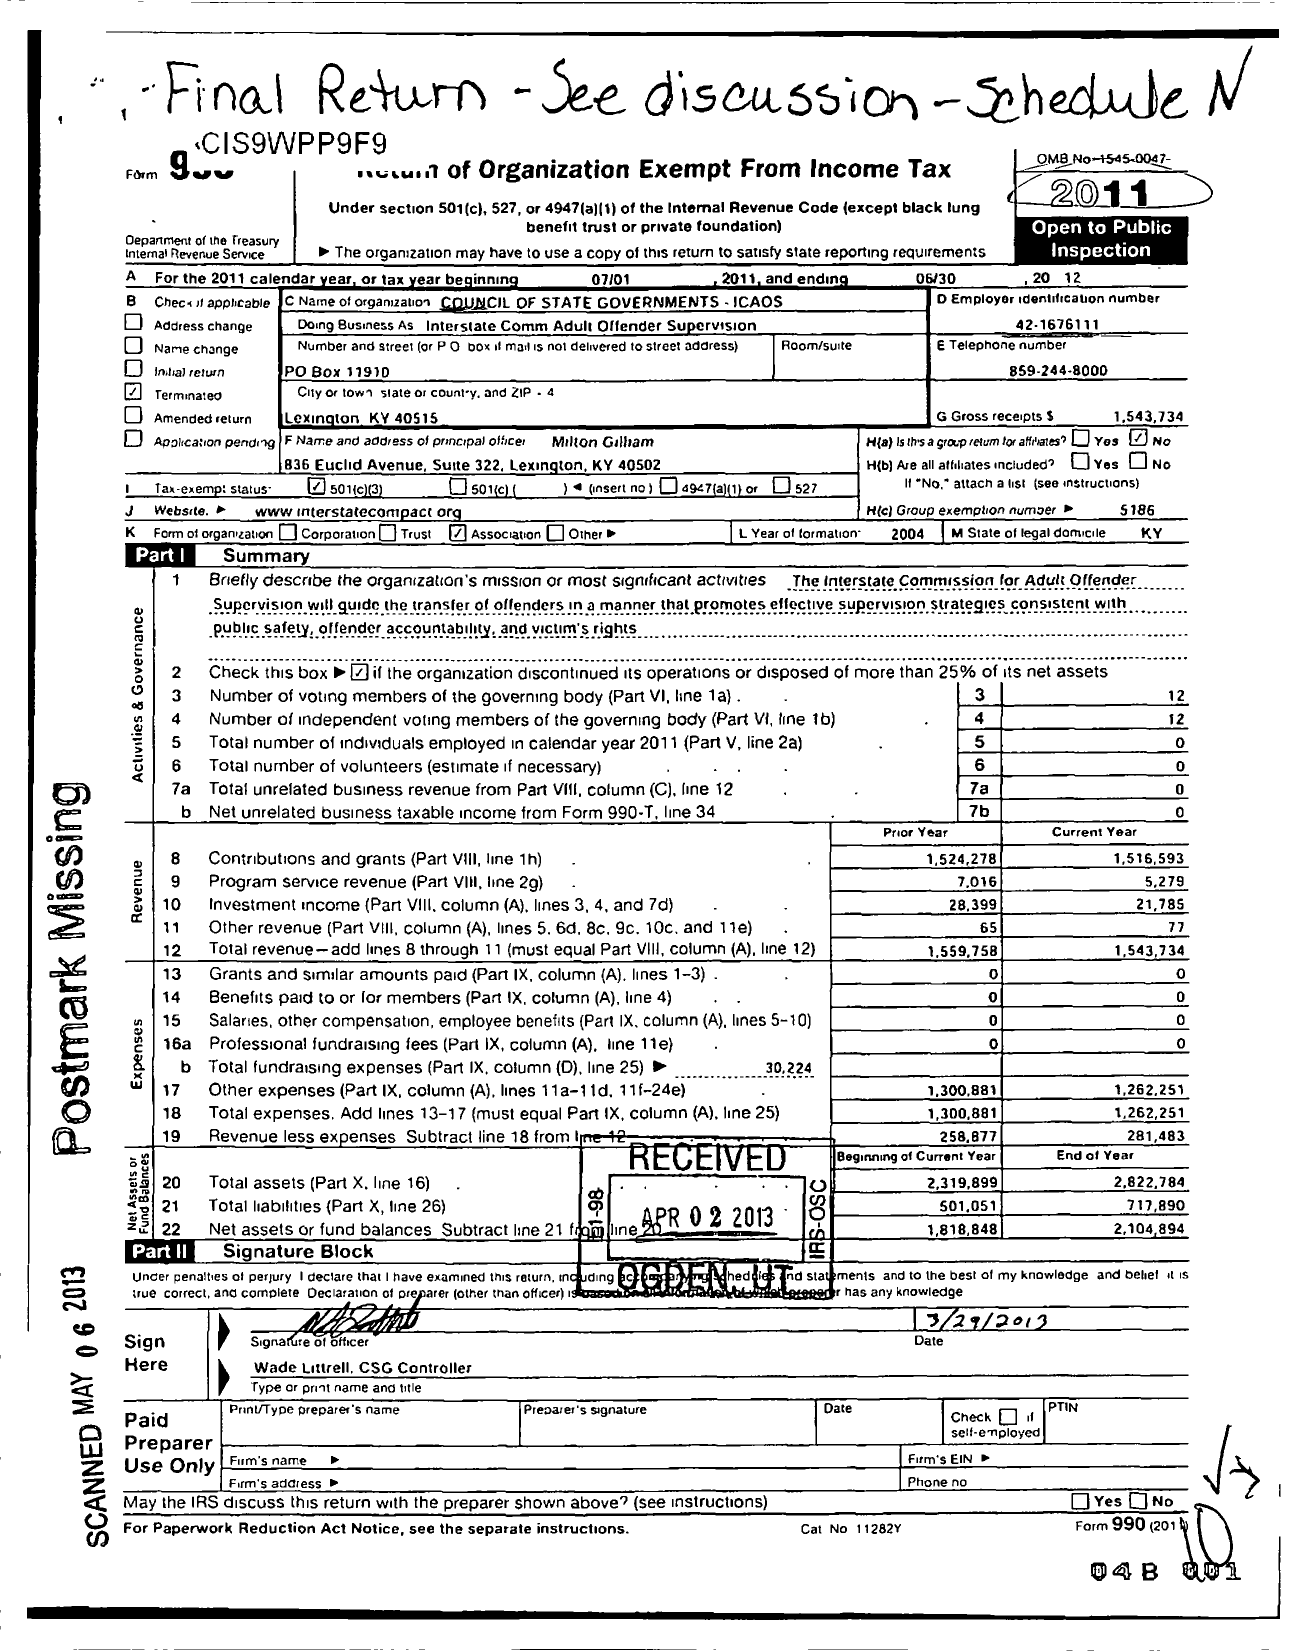 Image of first page of 2011 Form 990 for Council of State Governments - Icaos